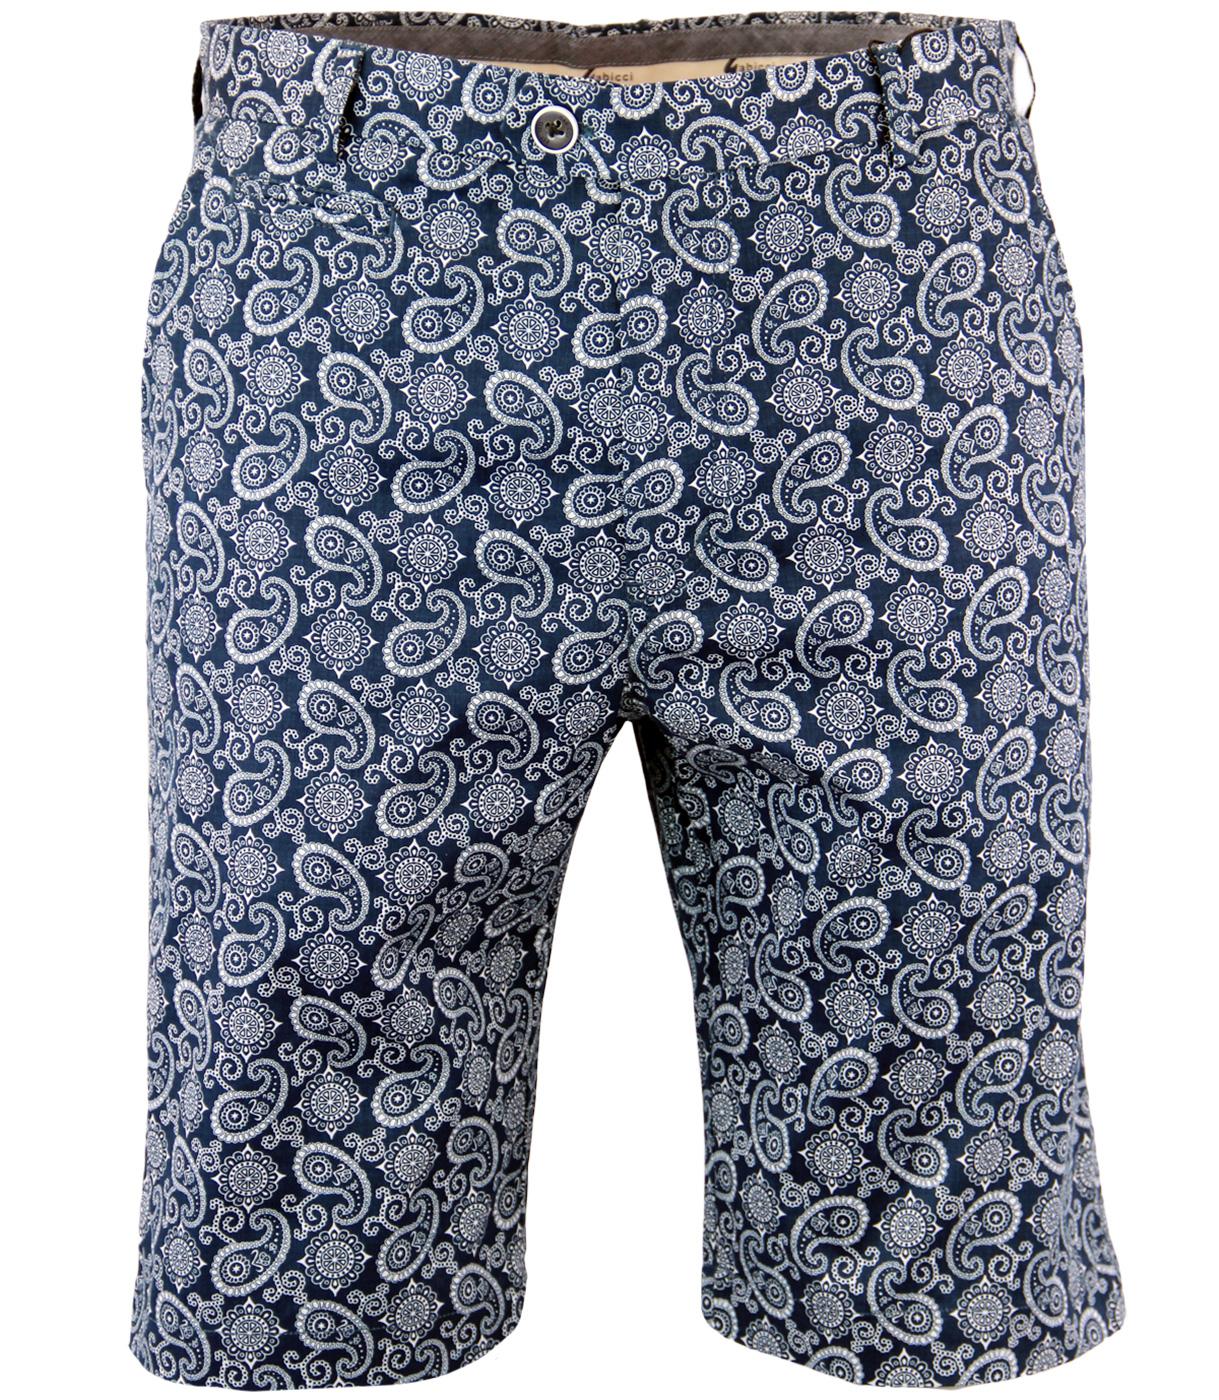 GABICCI VINTAGE Sixties Psychedelic Paisley Shorts in Navy